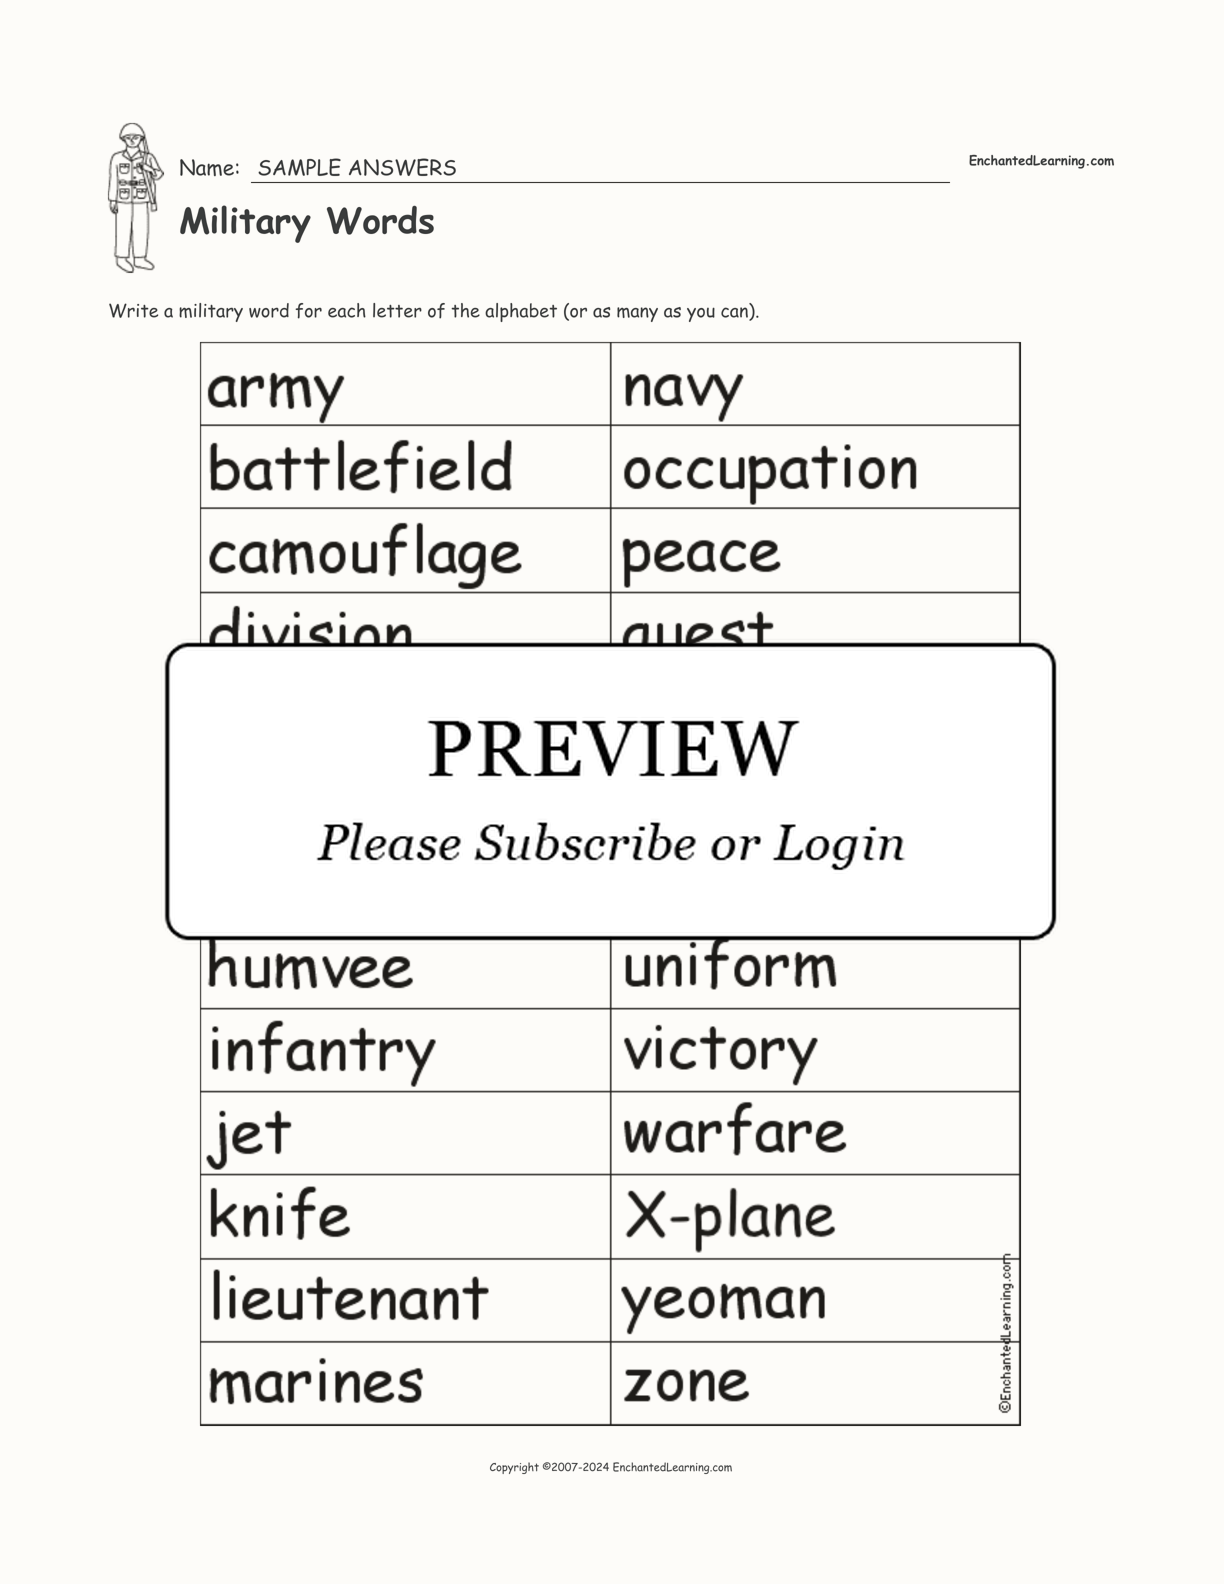 Military Words interactive worksheet page 2